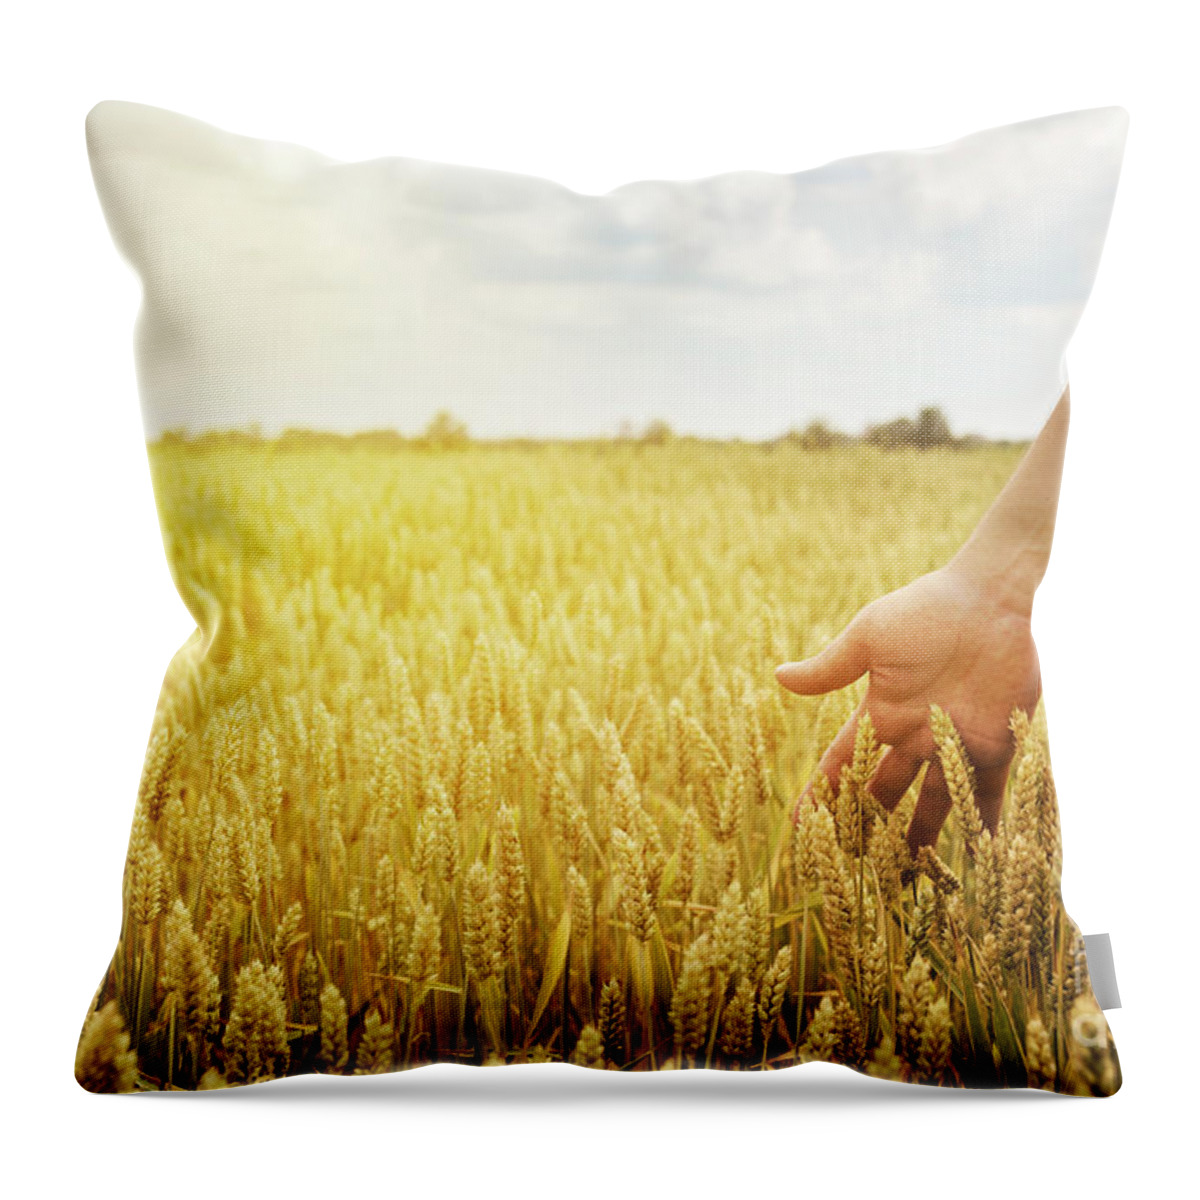 Wheat Throw Pillow featuring the photograph Wheat Field by Jelena Jovanovic